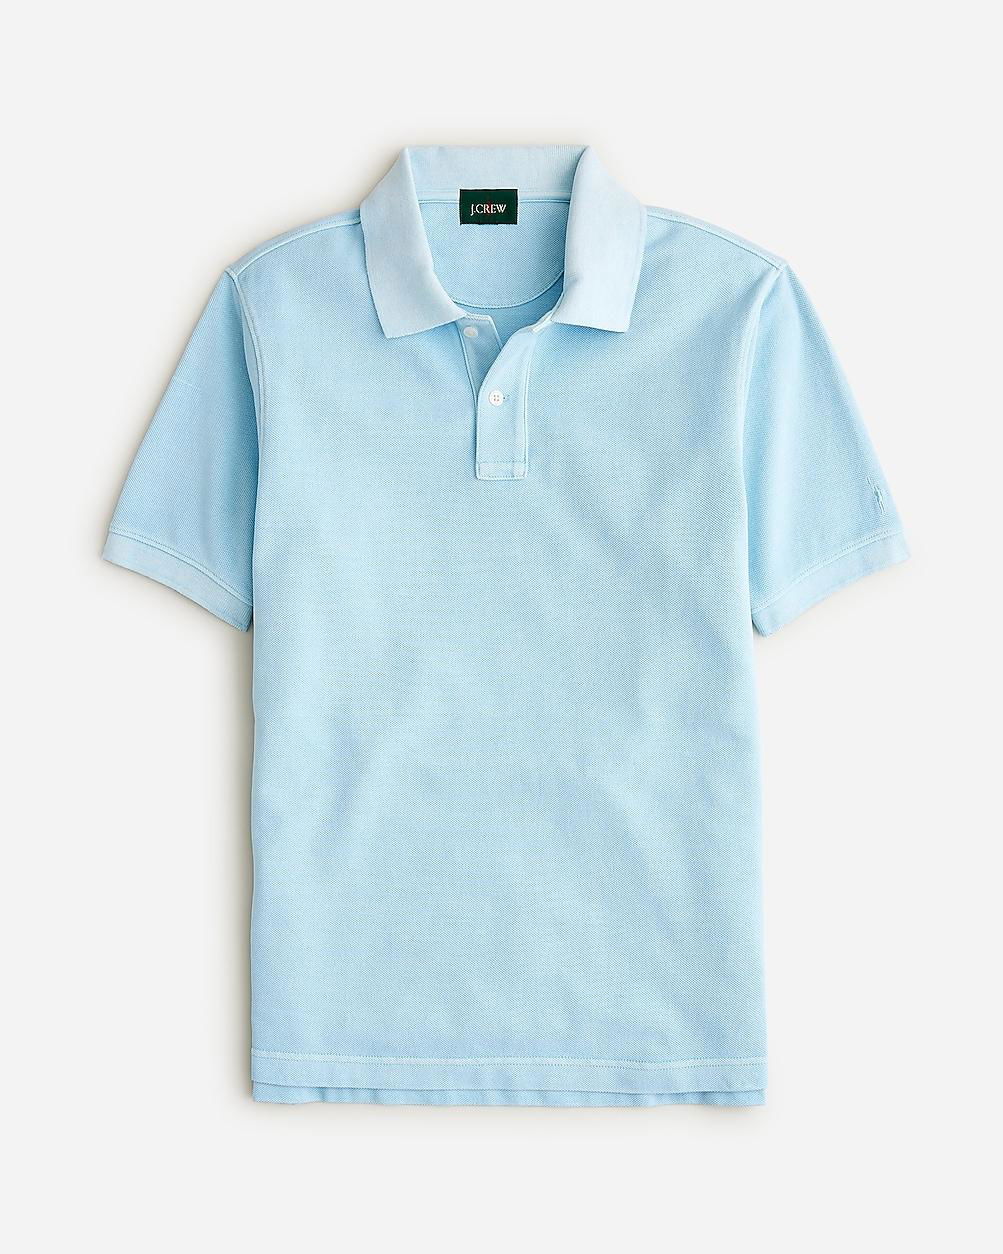 Slim washed piqué polo shirt by J.CREW